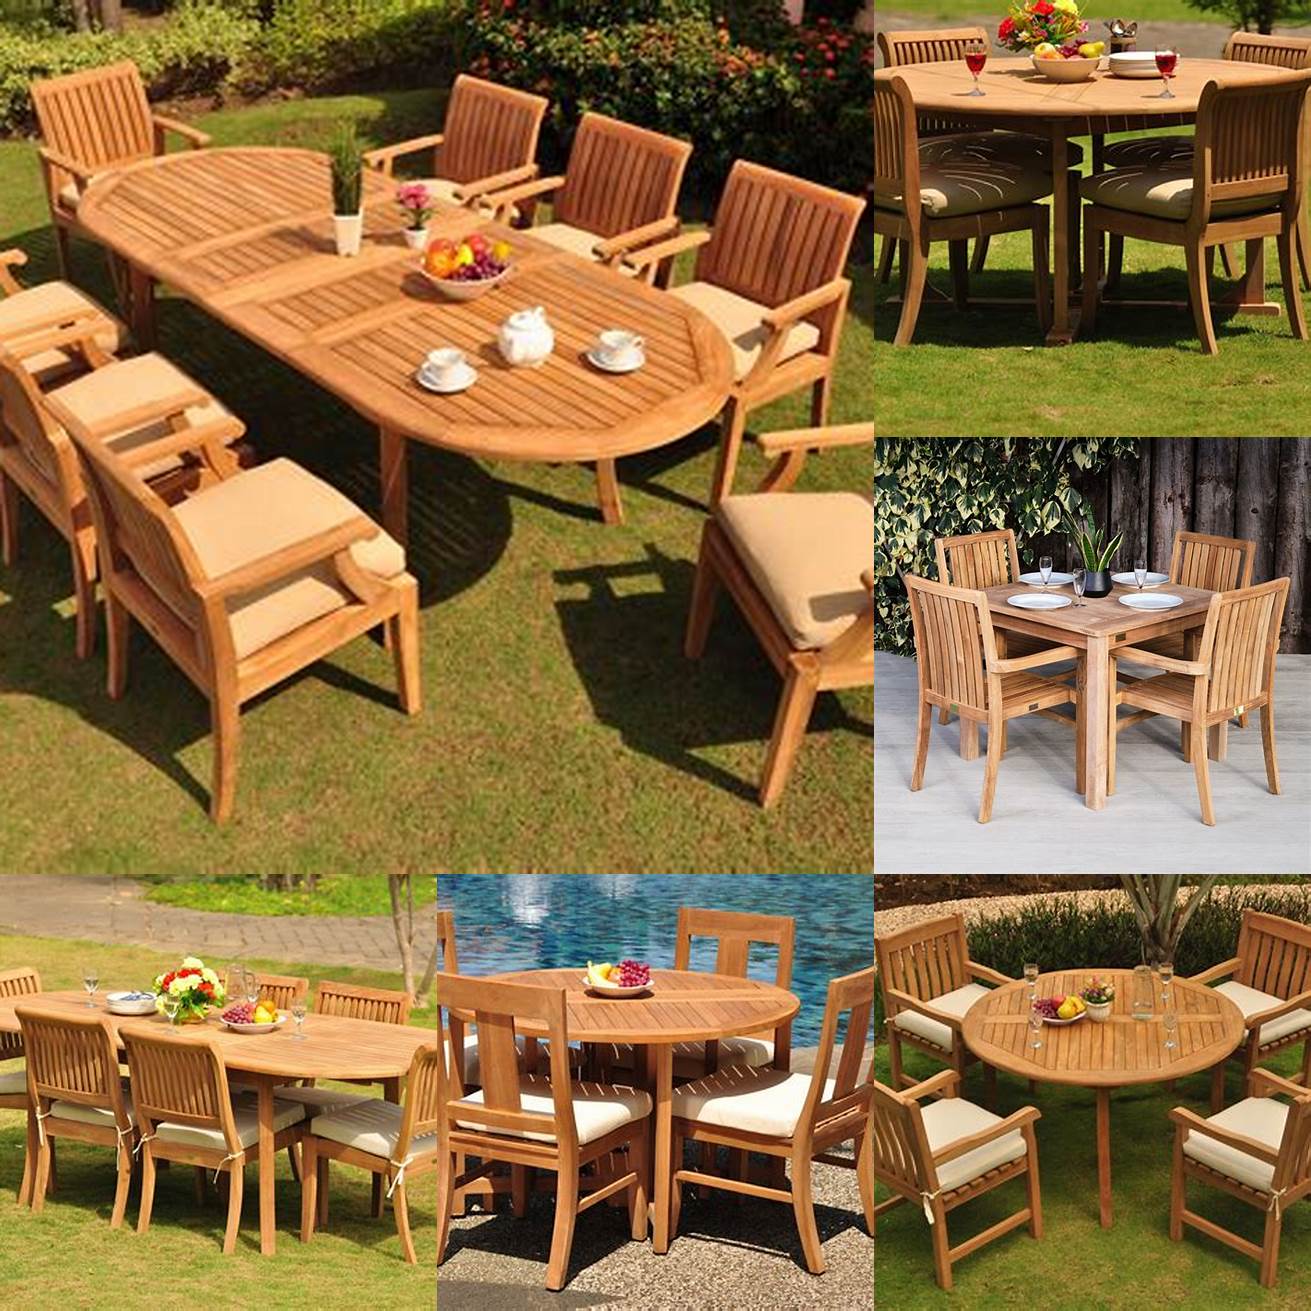 An image of a teak table and chairs in an outdoor setting